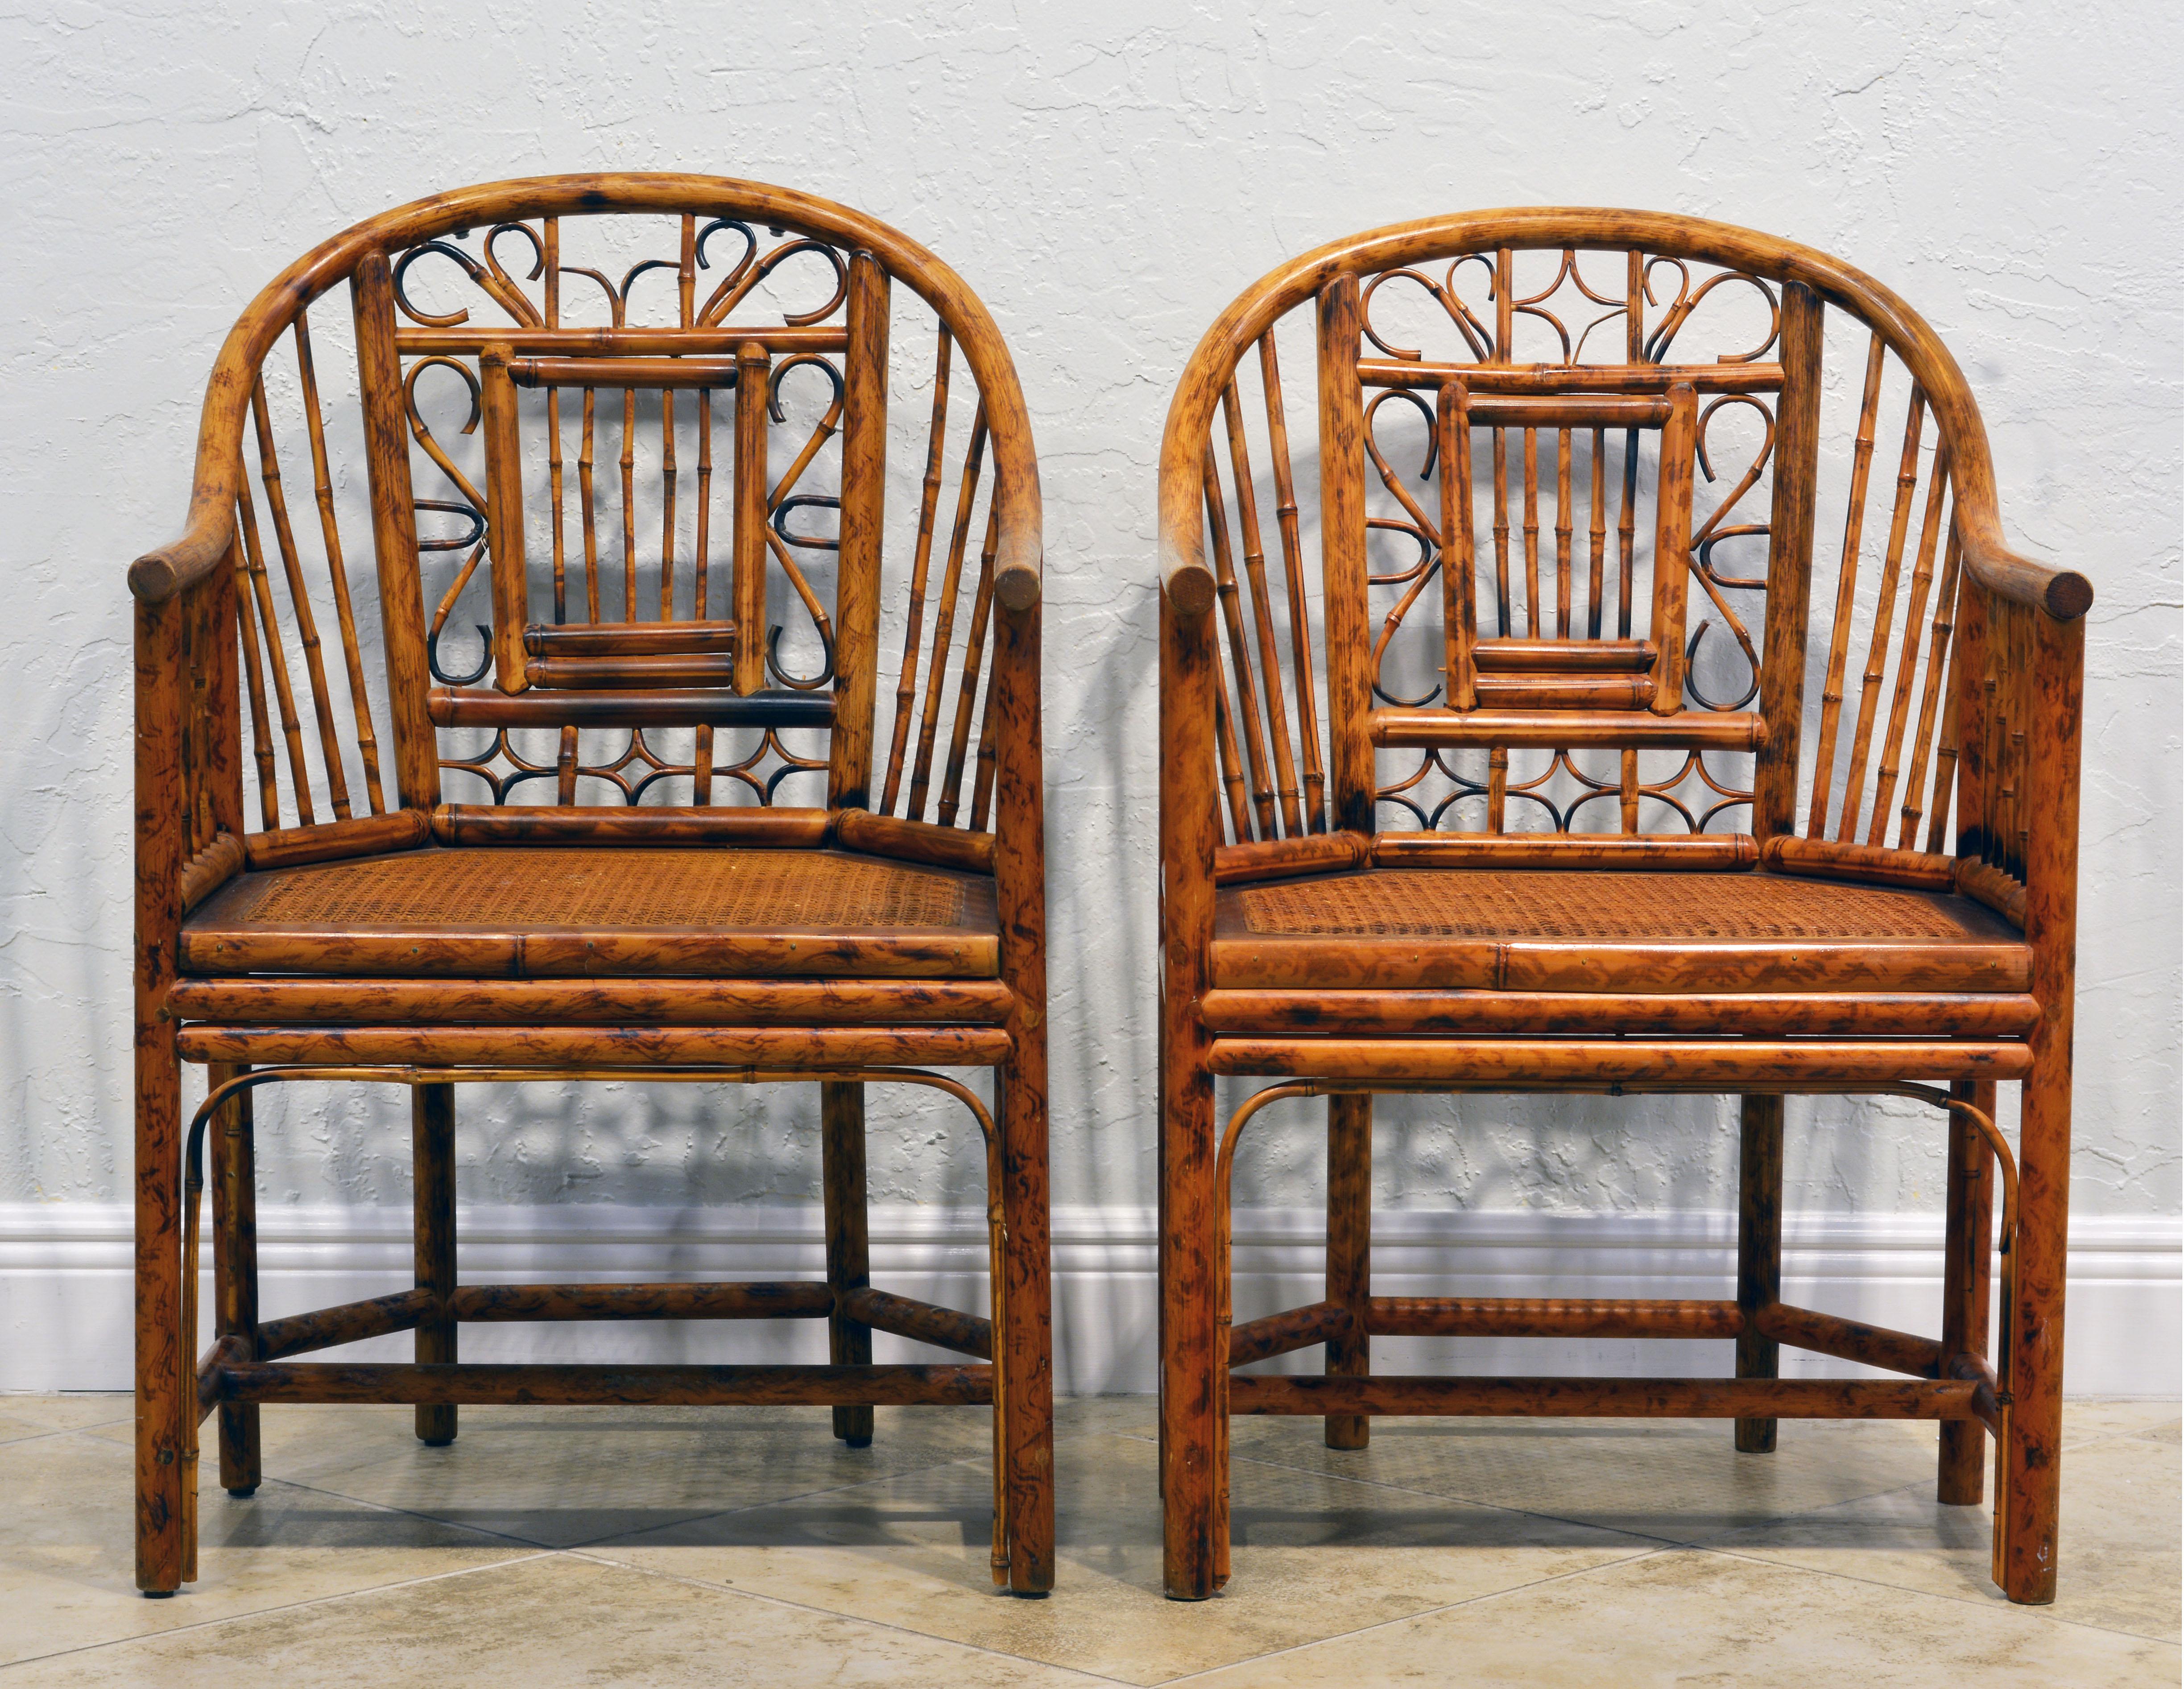 These iconic Brighton Pavilion style chinoiserie bamboo arm chairs are made of burnished bamboo with beautifully detailed backs and cane seats. They rest on six legs united by stretchers.